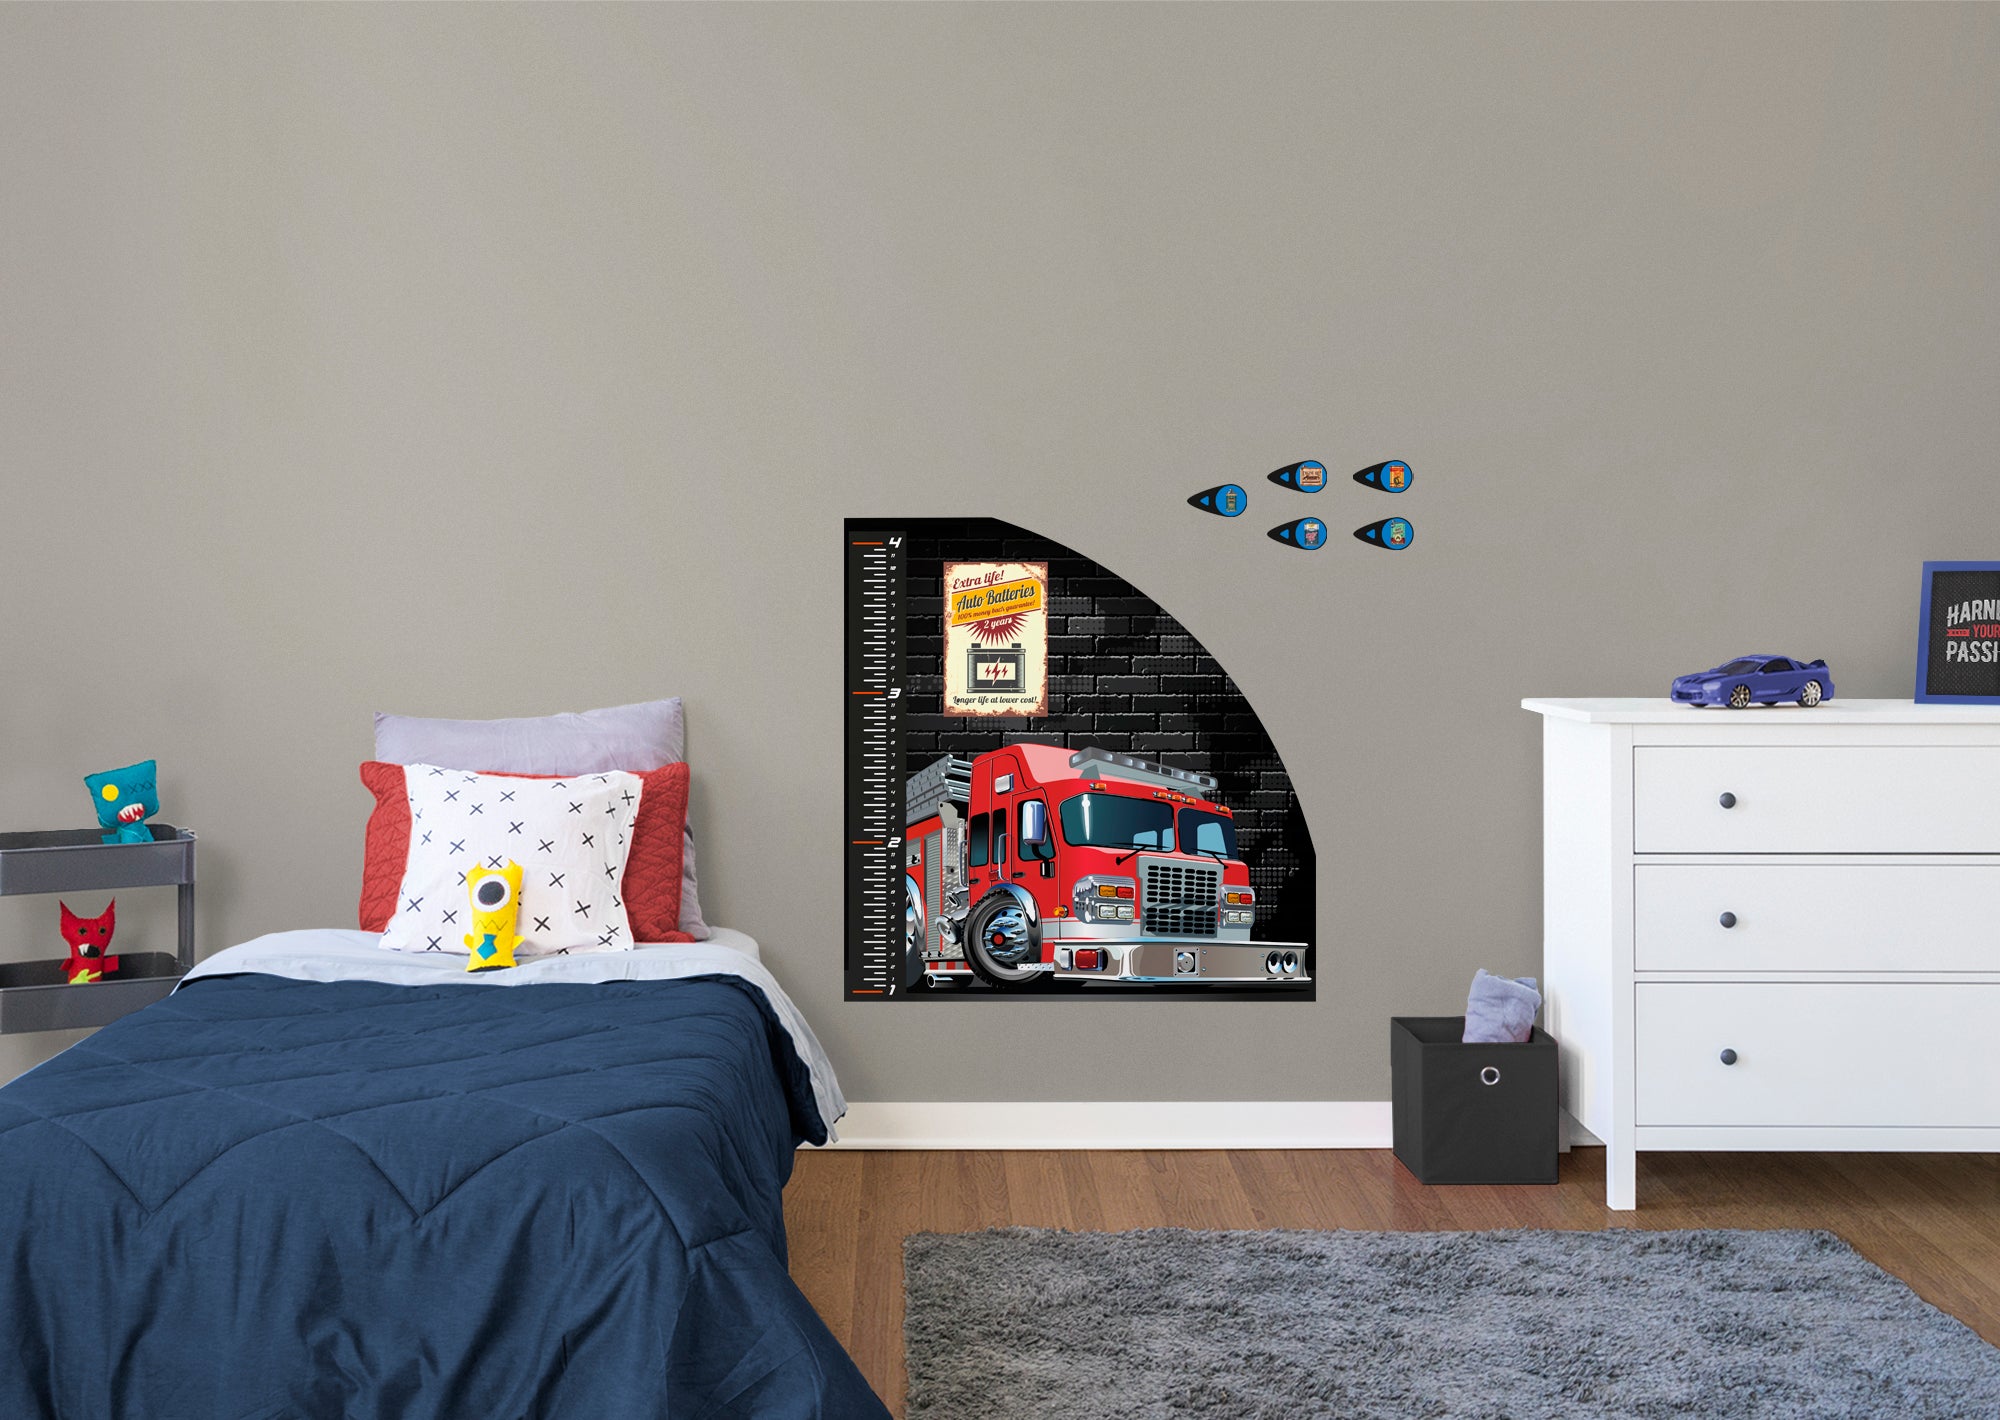 Automobile Growth Charts Fire Truck 02 Car - Removable Wall Decal Growth Chart (38"W x 39"H) by Fathead | Vinyl